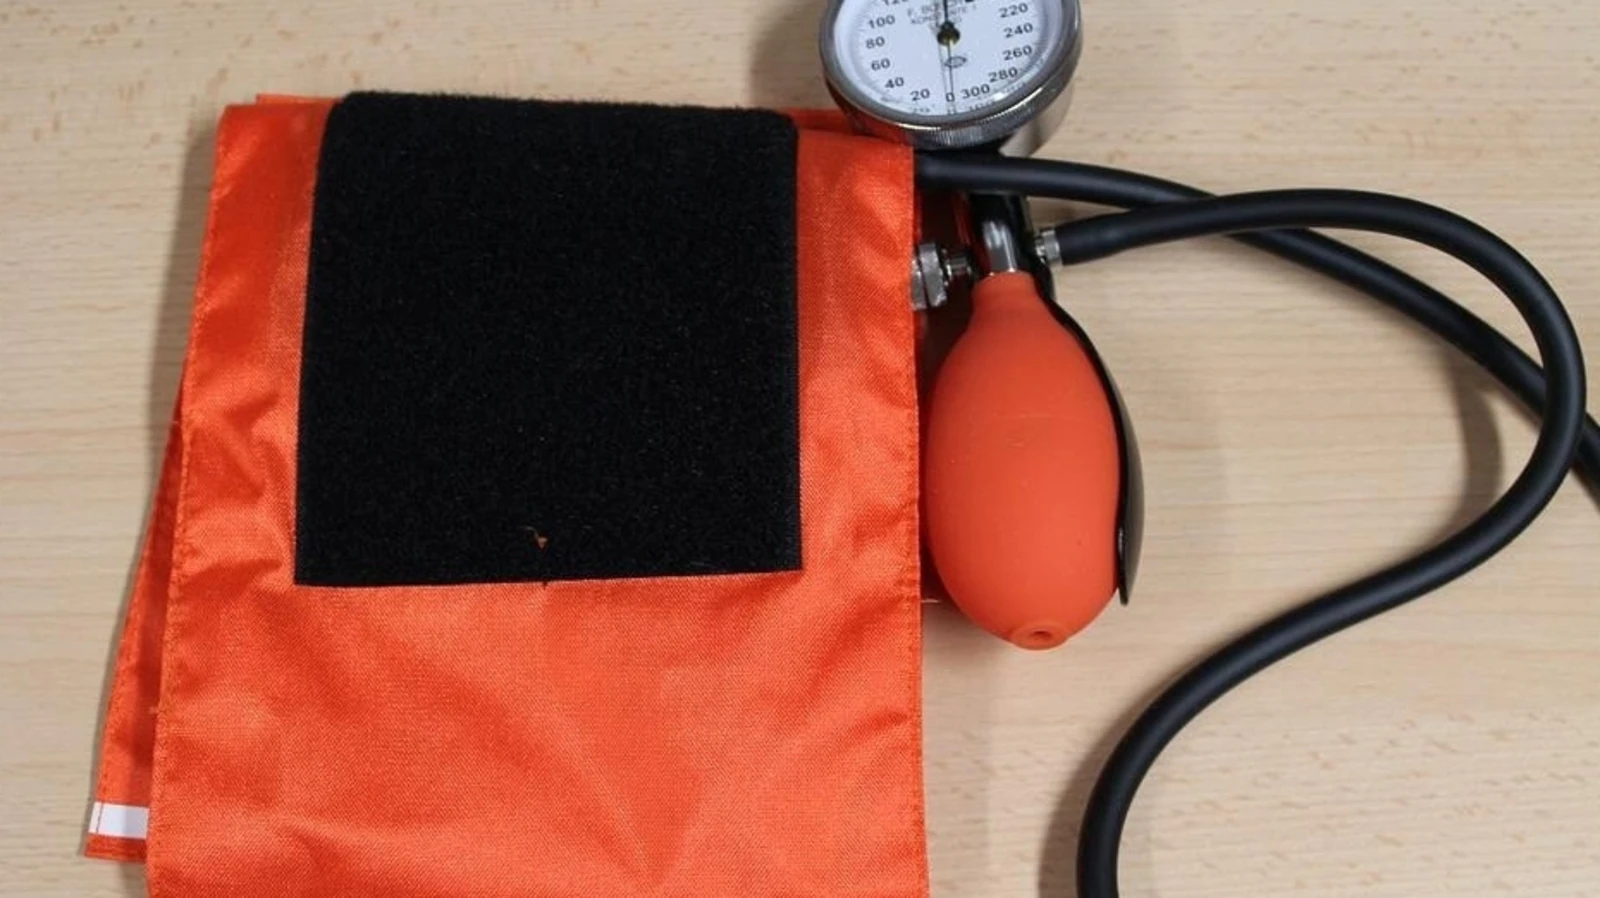 Blood pressure basics: How to measure BP at home, ideal range, risks of high BP